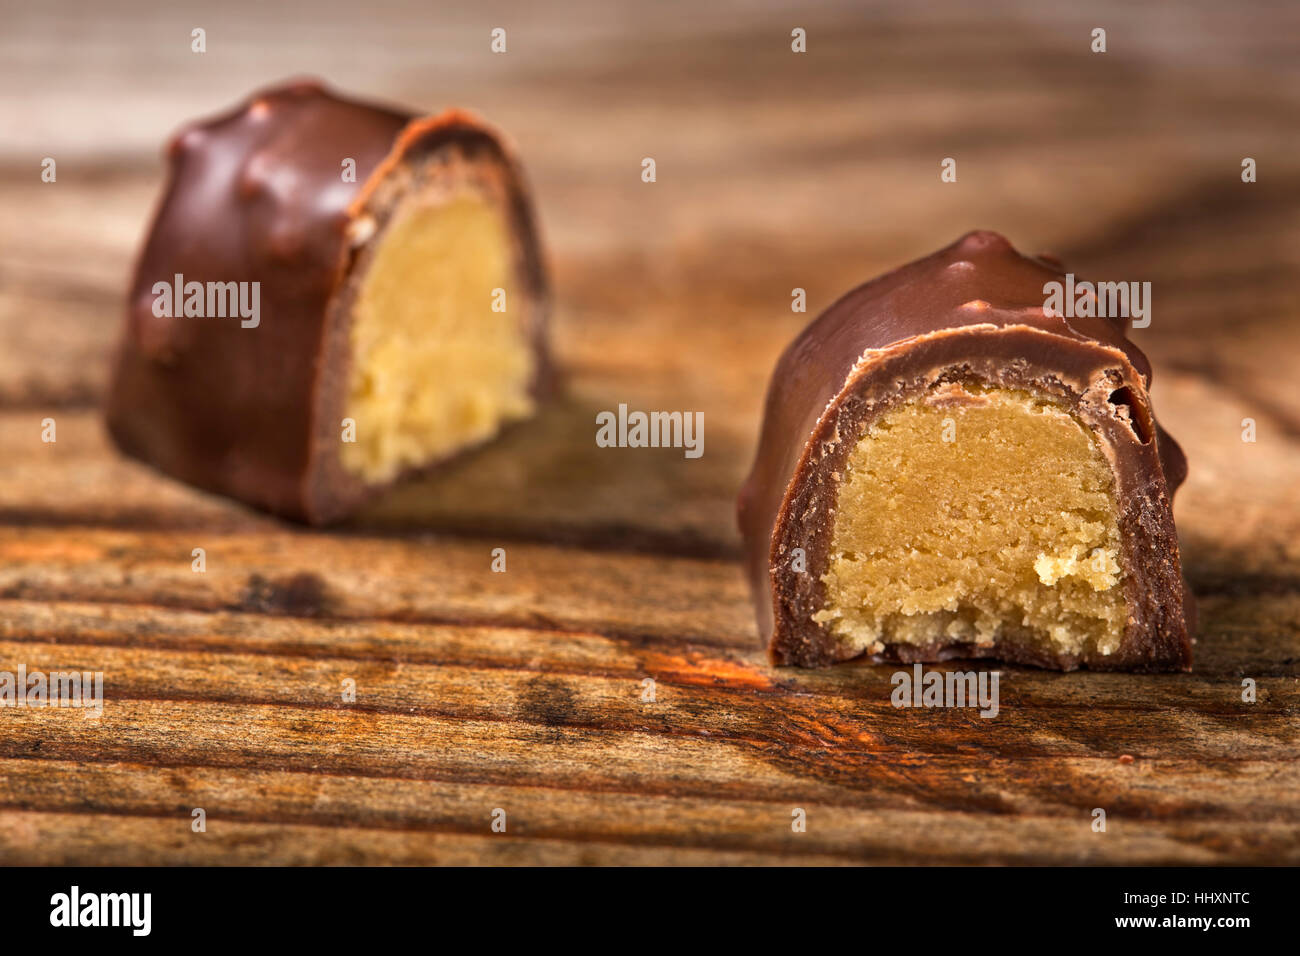 One chocolate candy cut in half over wooden background Stock Photo